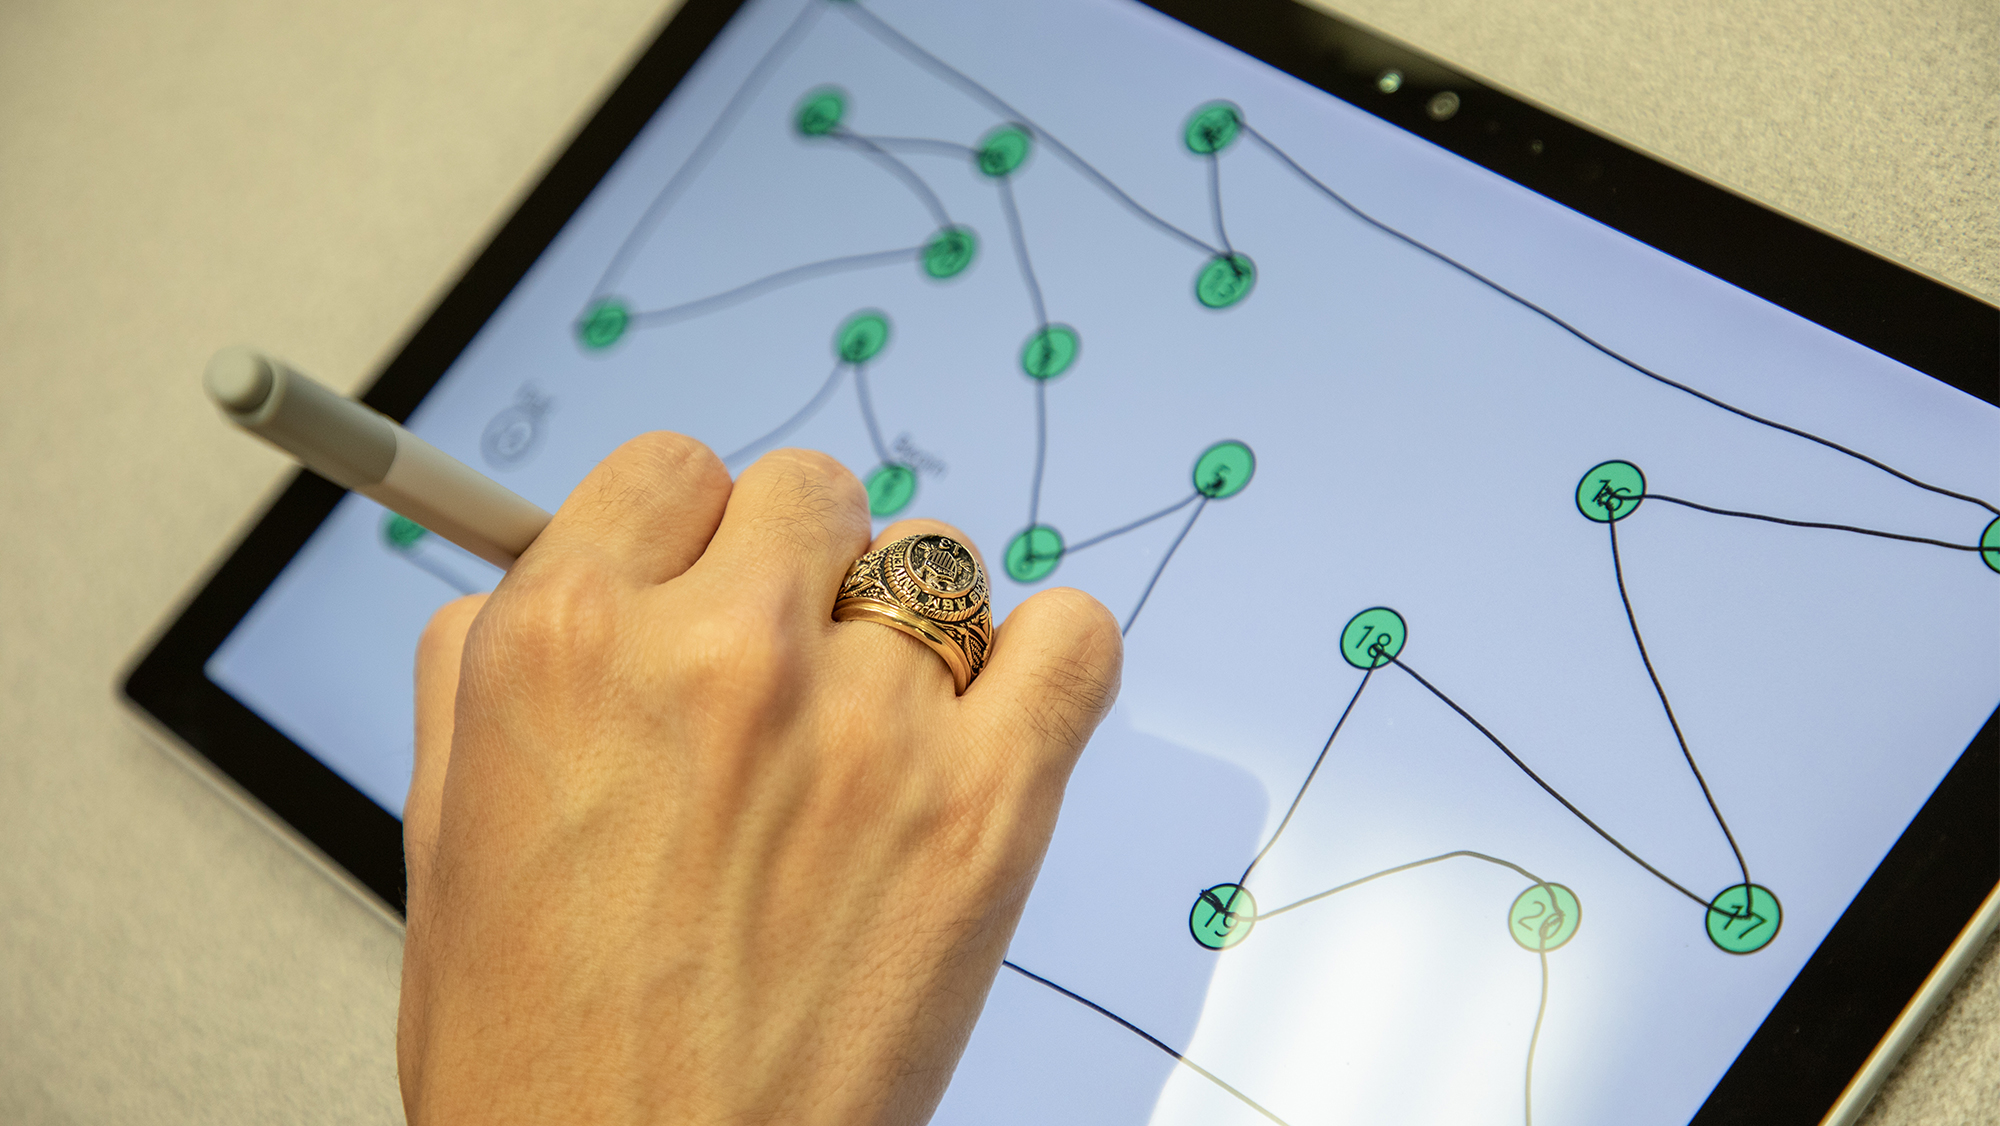 Hand using a stylus to connect numbered dots on a tablet.